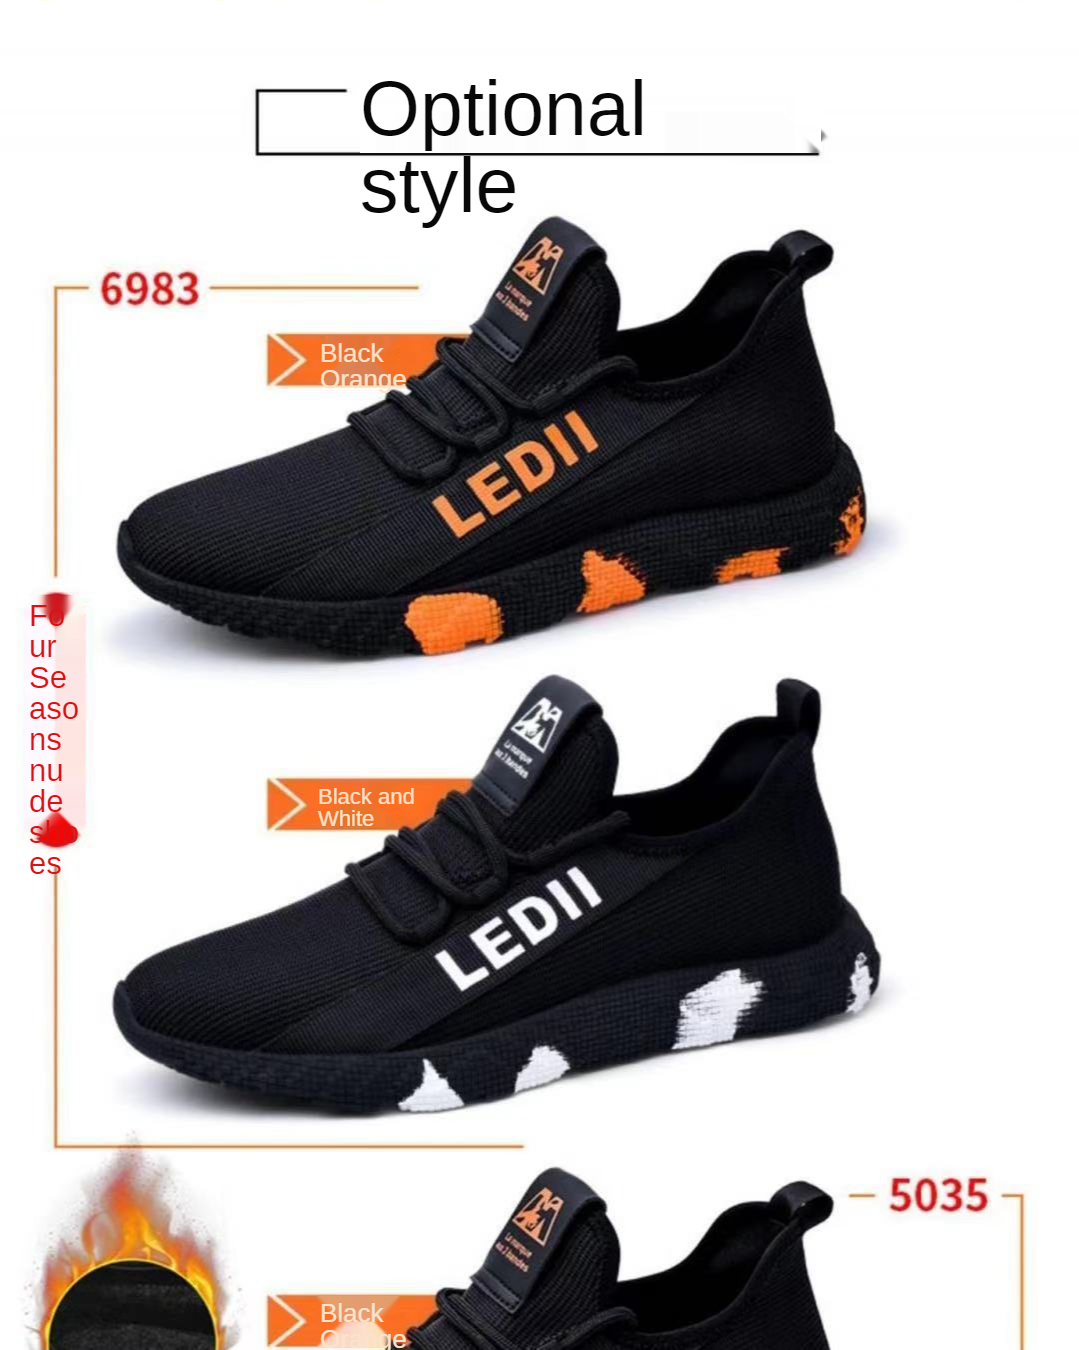 Men's Shoes 2021 New Spring/ Summer /Trend Shoes Sports Breathable Running Work Shoes